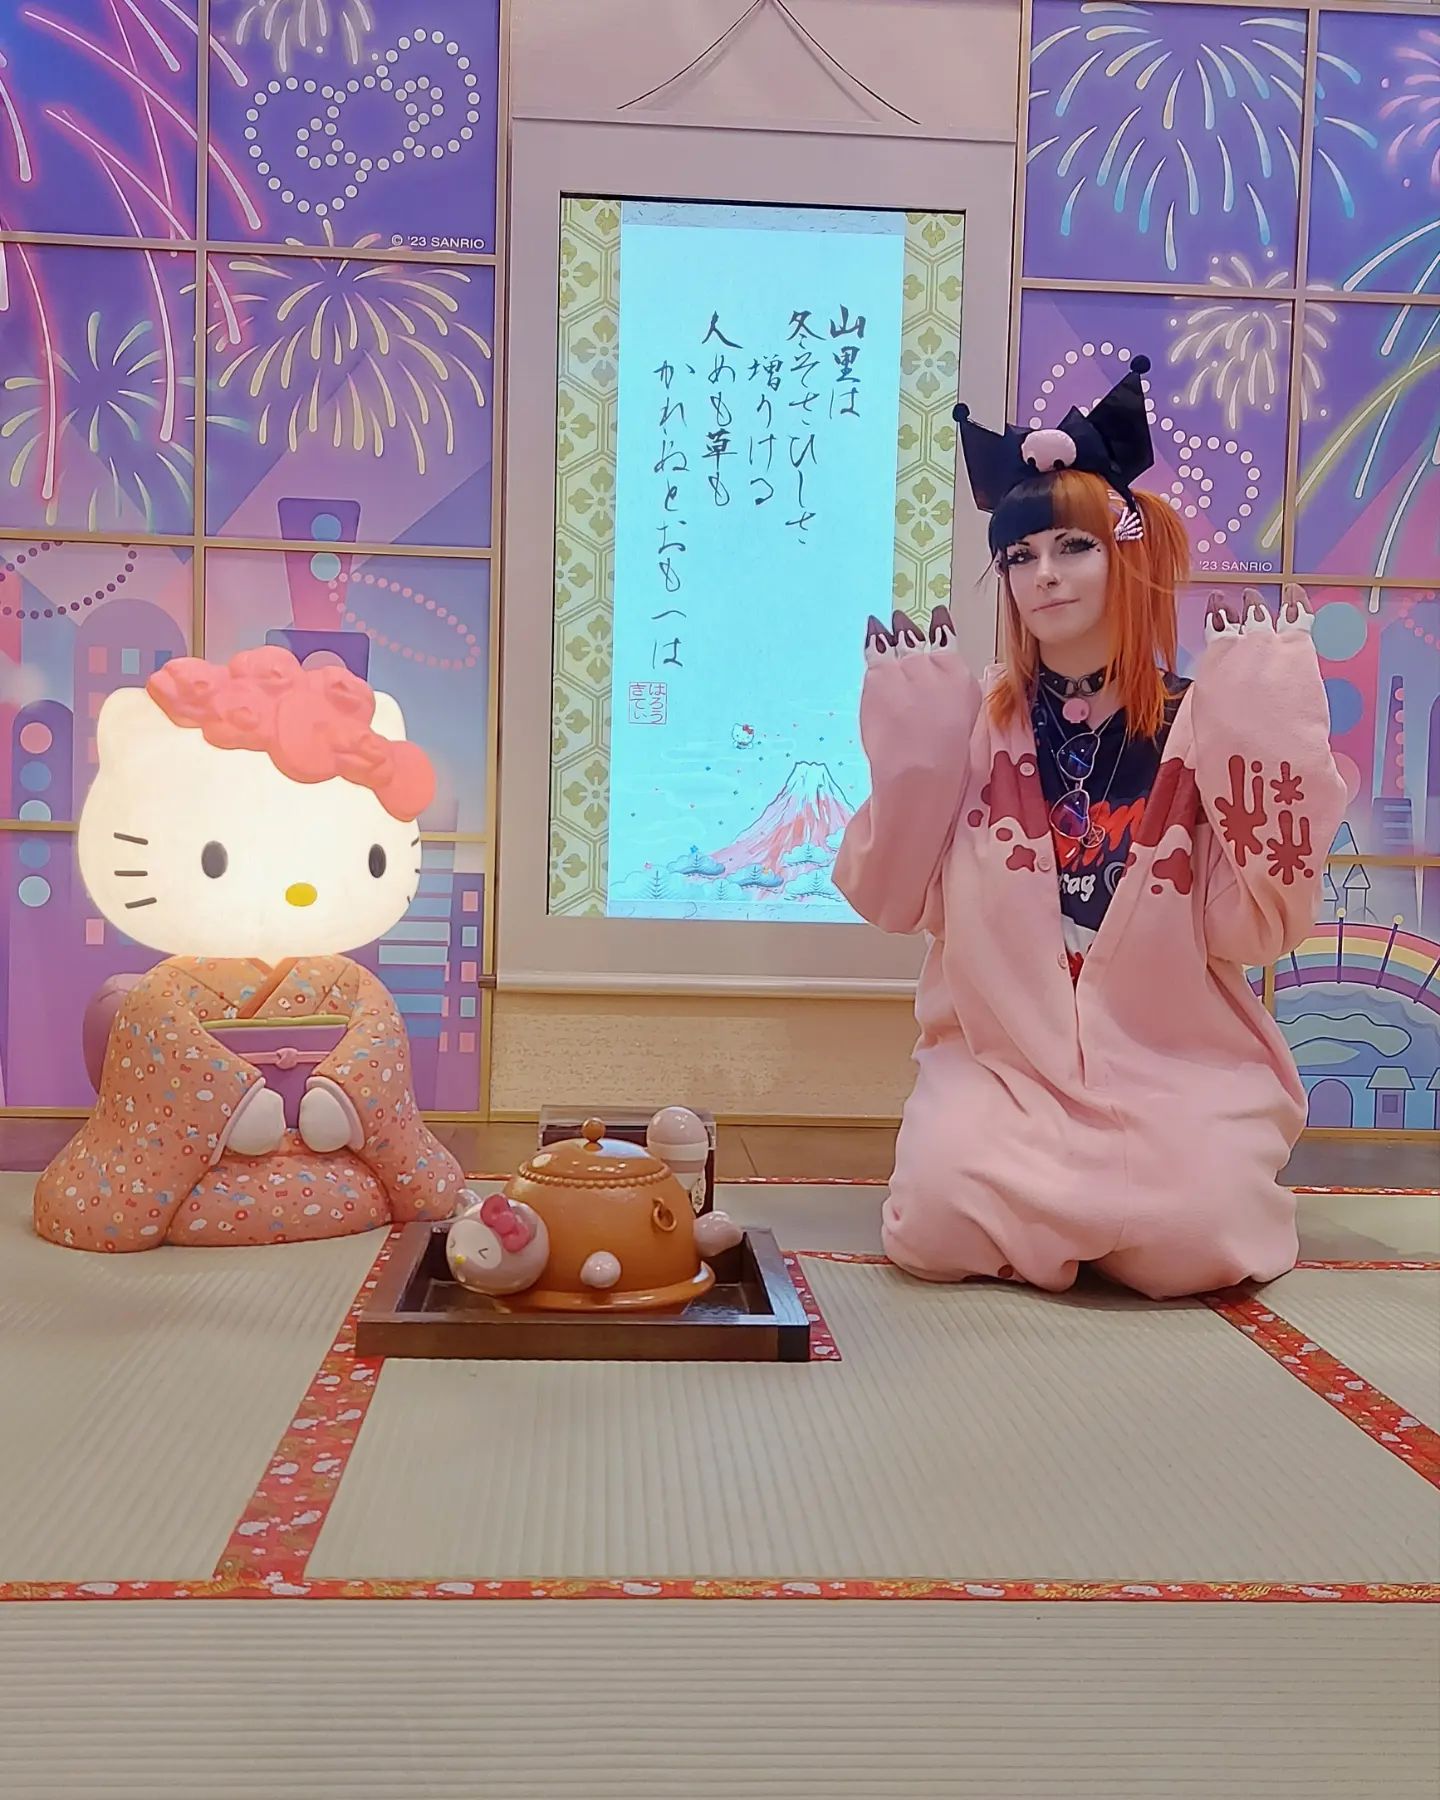 ✨️Happy New Year! ✨️
Spending it with Hello Kitty & Rilakkuma in their kimonos ♡ in my Gloomy Bear onesie from @hellokigurumi

2023 was overall a crappy year (Japan being the exception) and I don't expect 2024 to be any better especially with the 7.6 Magnitude earthquake Japan was hit with right on January 1st, followed by the Plane collision on the 2nd which had emergency supplies FOR the earthquake survivors. Talk about a bad omen for the new year. 

If you'd like to help the relief fundraiser, there is a link on @joey.the.anime.man YT channel: 

https://youtu.be/gioFHhXe2Fs?si=MJsmPLsM-lGGPkzF

Unfortunately, the Canadian government no longer allows sharing links regarding global media (yay censorship), so please go see his video regarding the donation links. 

I'm hoping everyone else had a much happier start to 2024, and I hope it continues that way! 

#happynewyear #newyear #2024 #japan #sanriopuroland
#sanrio #hellokitty #rilakkuma #tokyo